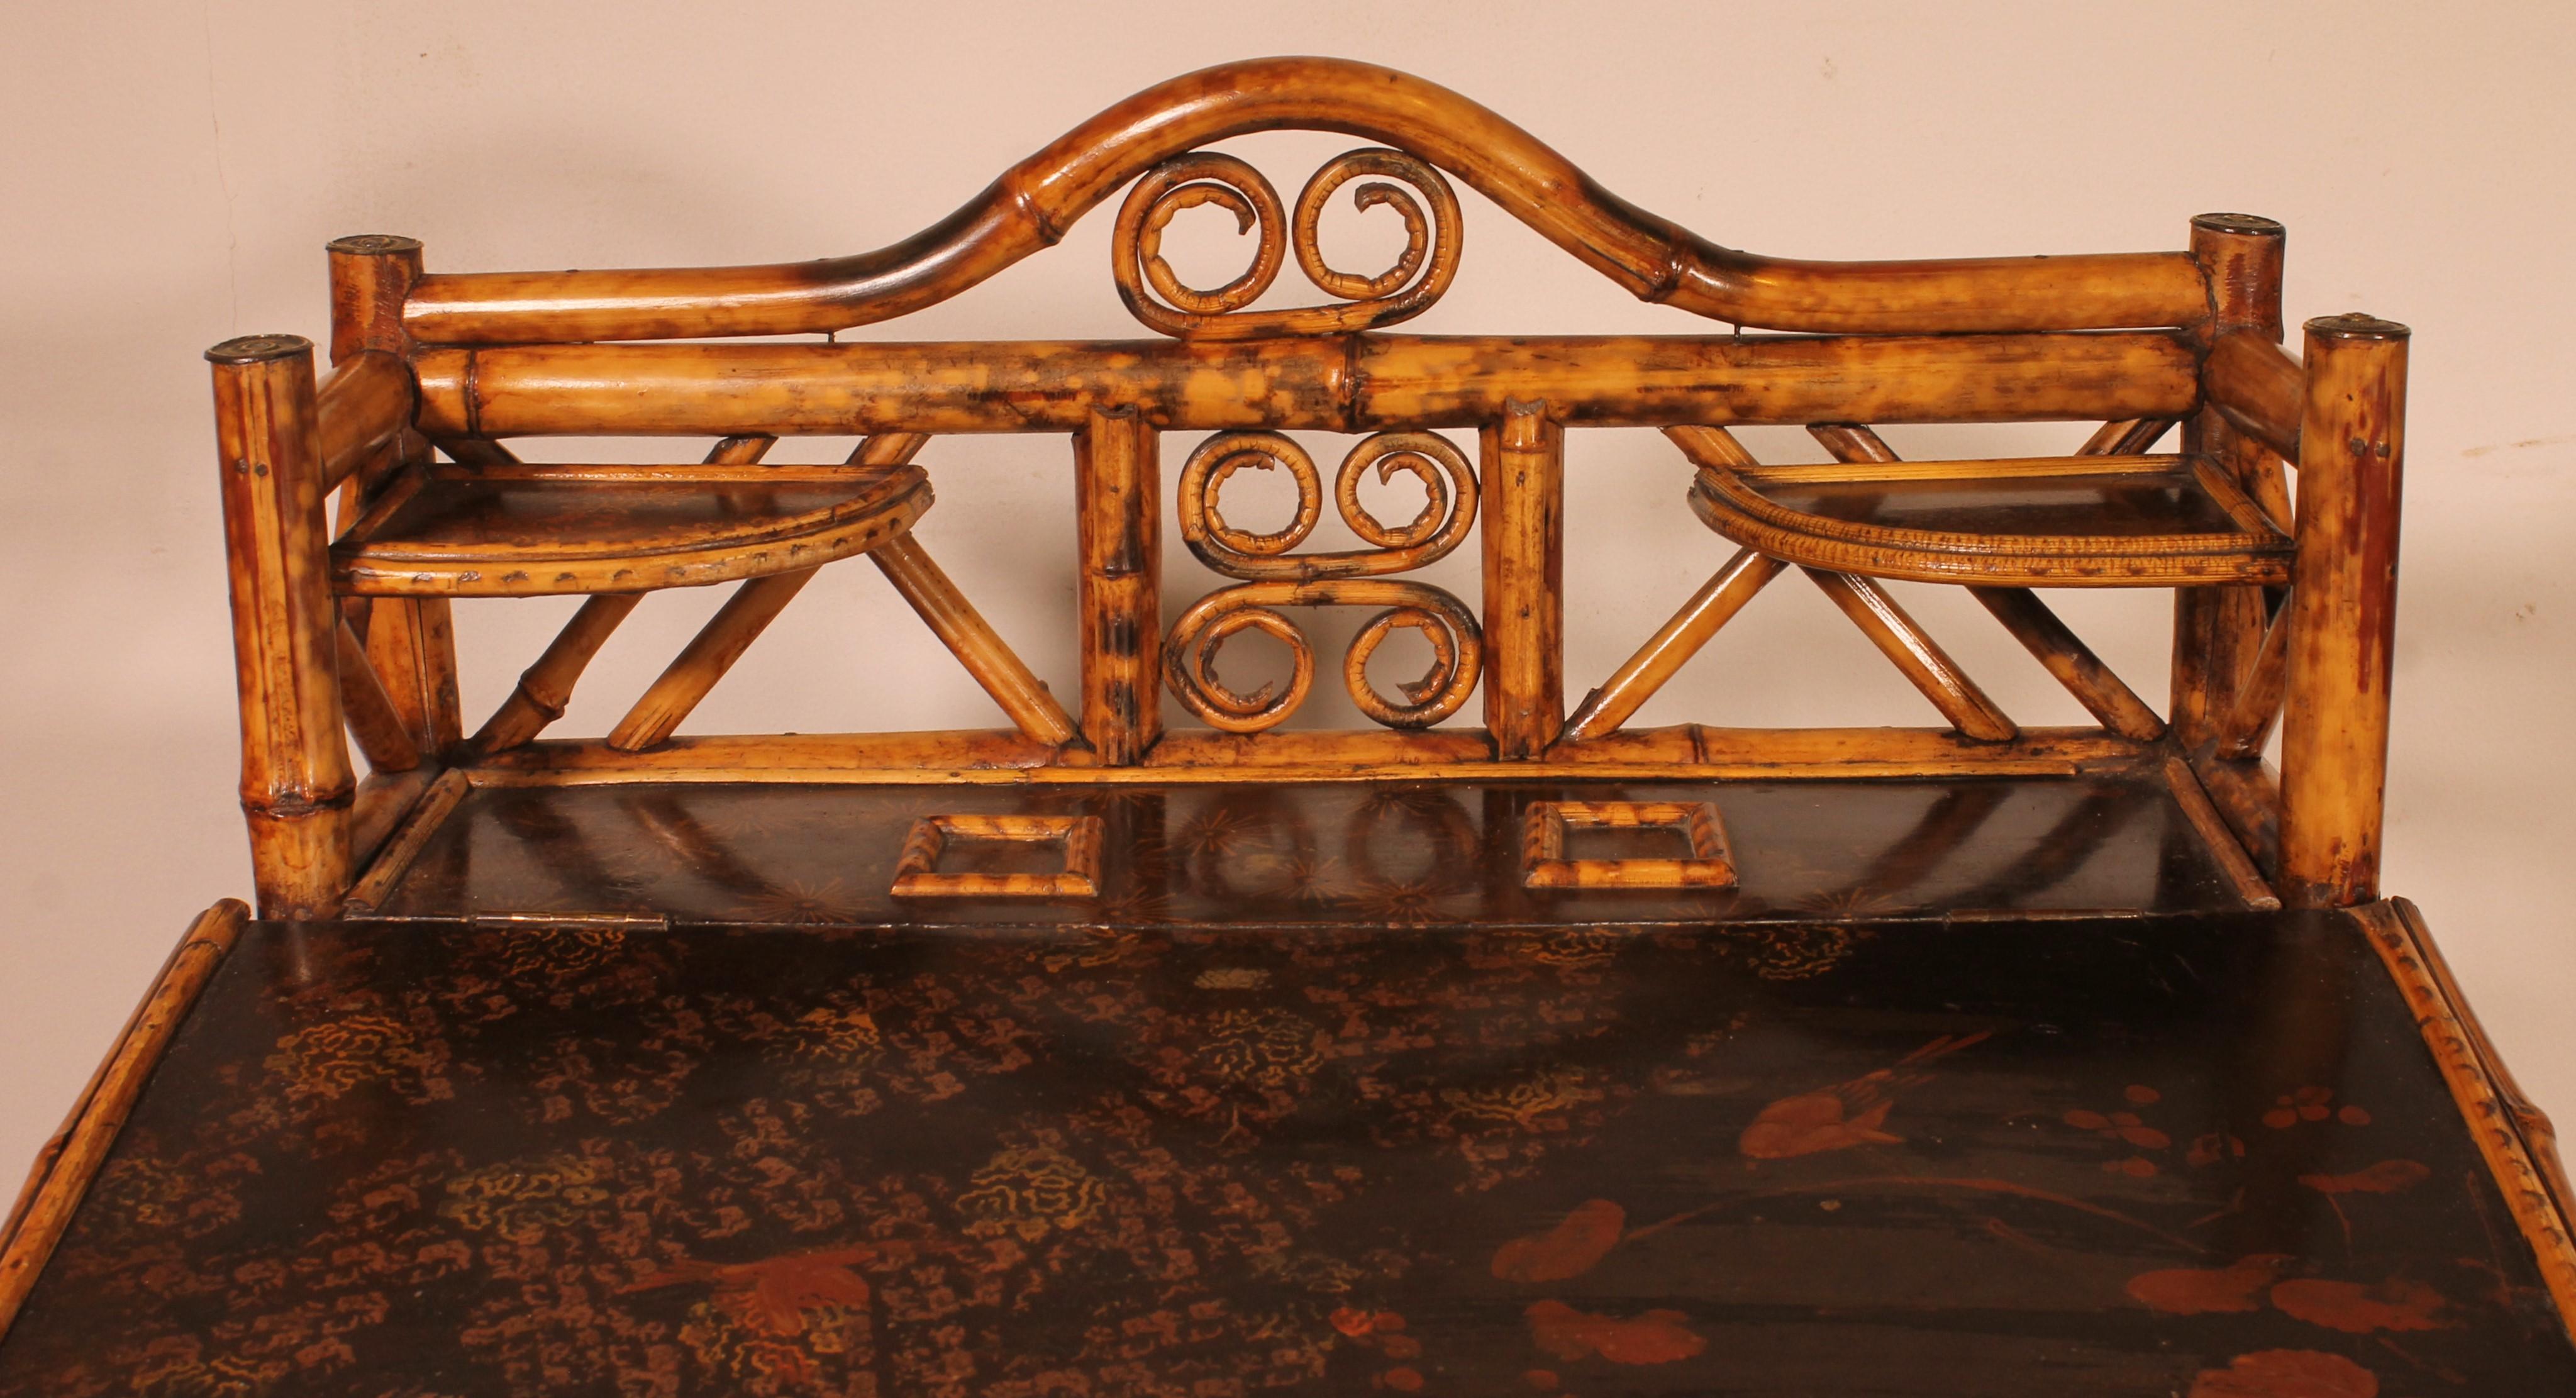 English Secretary/davenport In Bamboo And Lacquer With Asian Decor - 19th Century For Sale